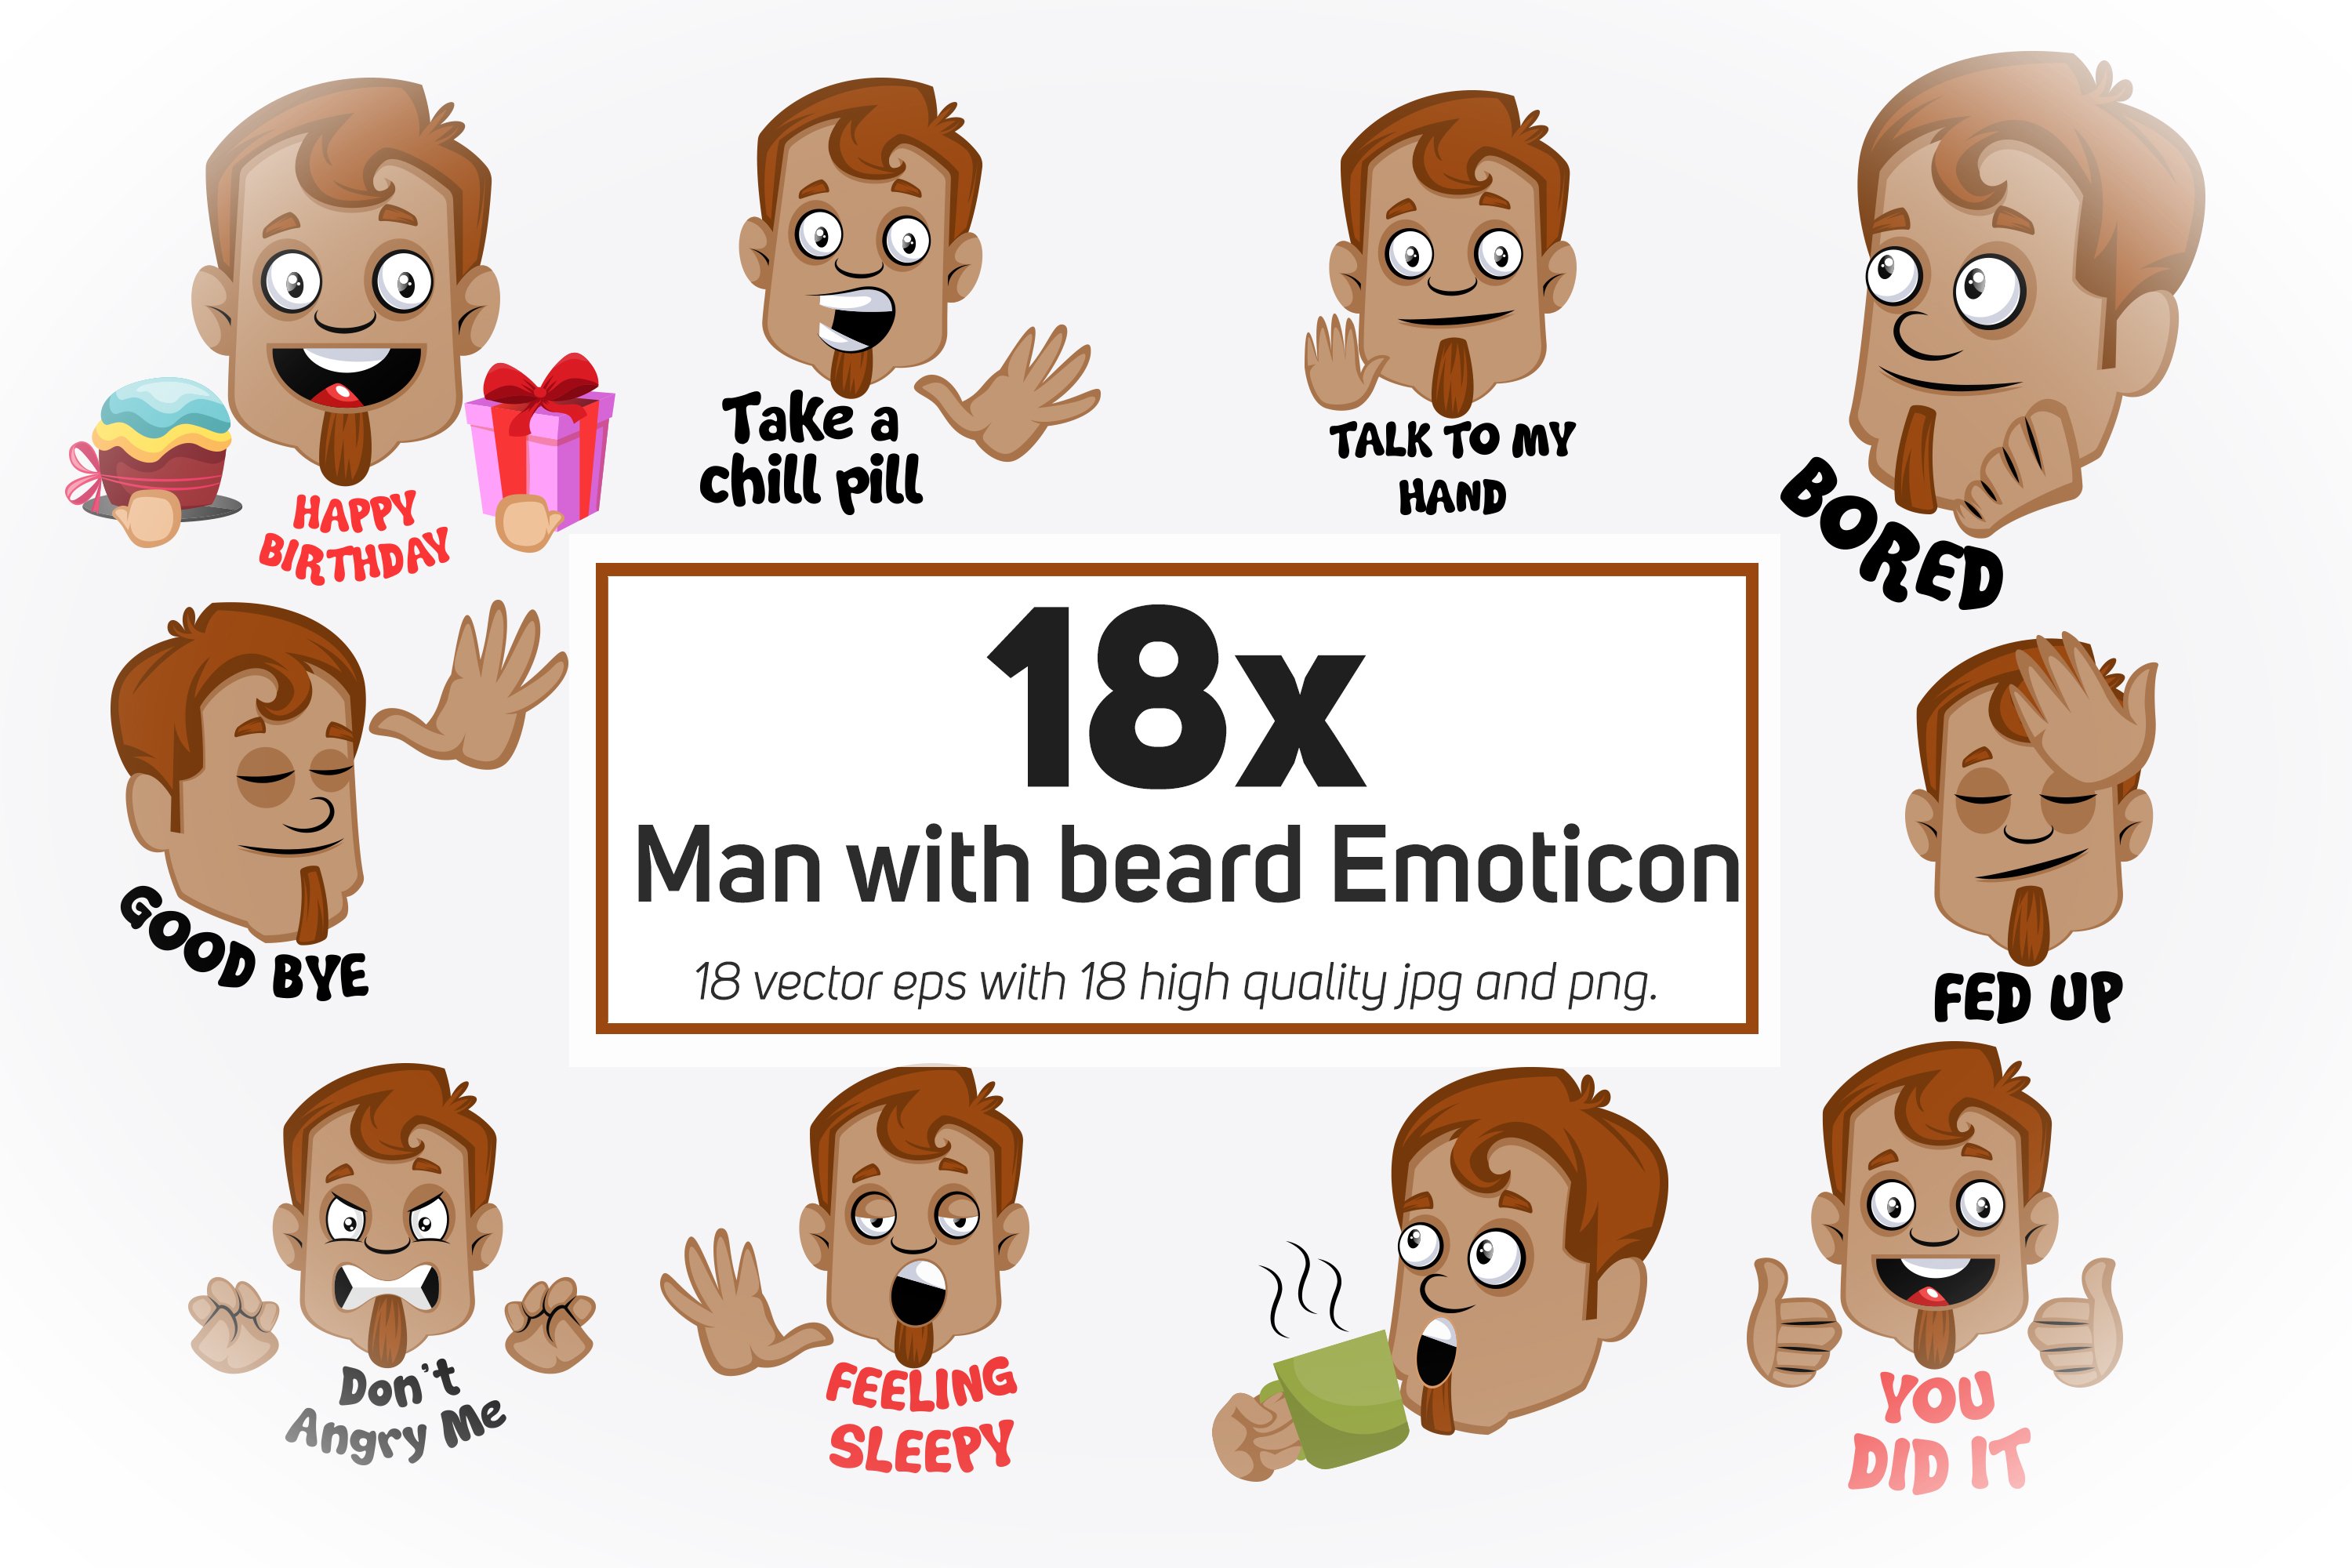 Collection of wonderful images of man with beard emoticon.